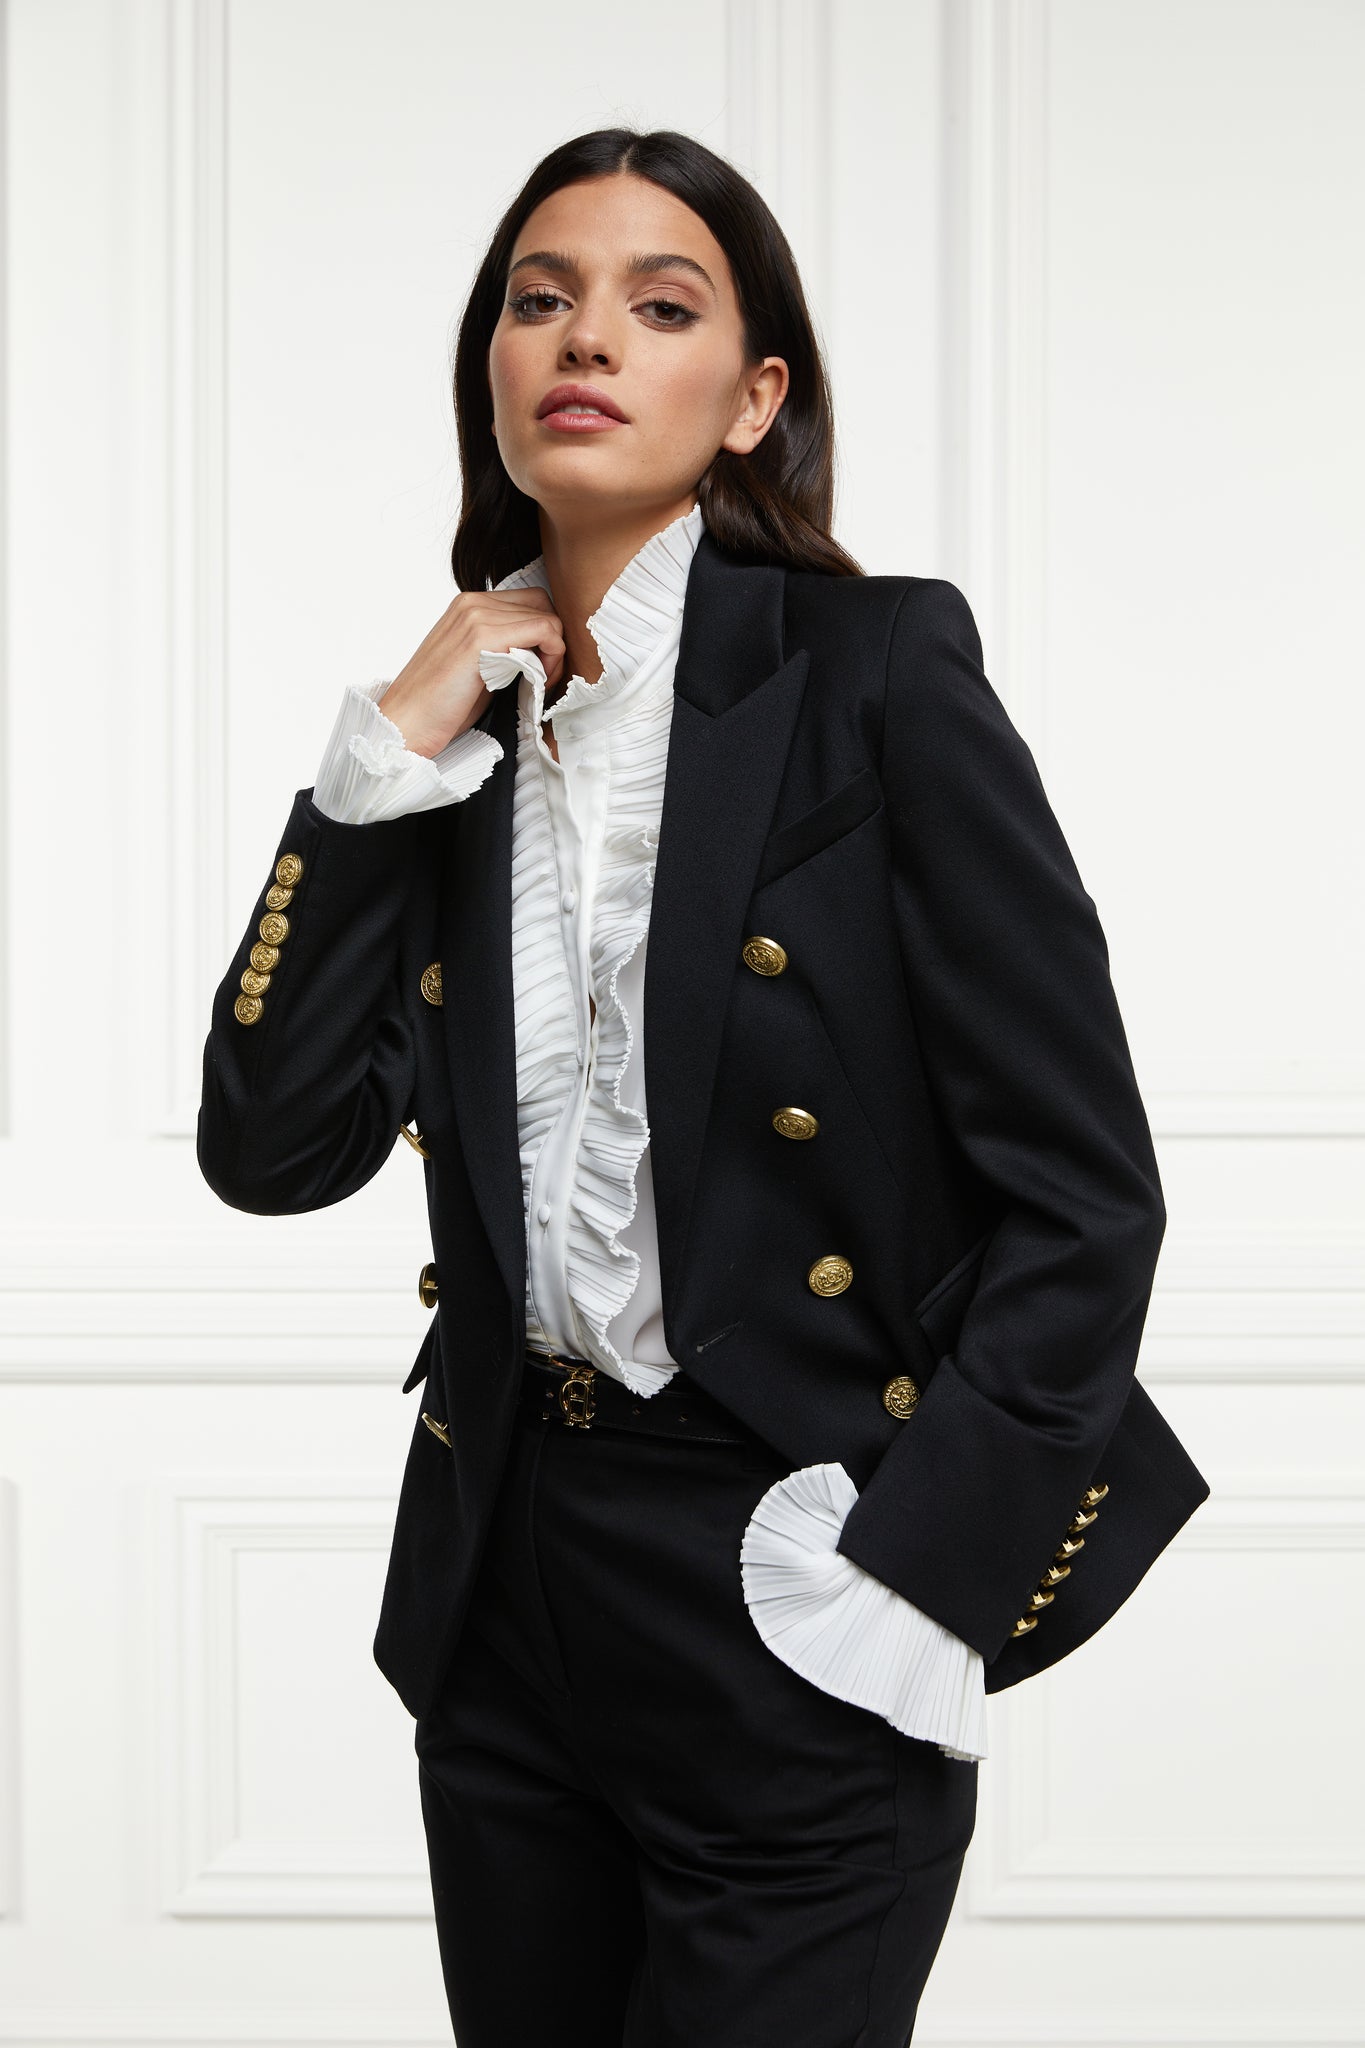 British made double breasted blazer that fastens with a single button hole to create a more form fitting silhouette with two pockets and gold button detailing this blazer is made from black barathea worn with white shirt and black tailored trousers